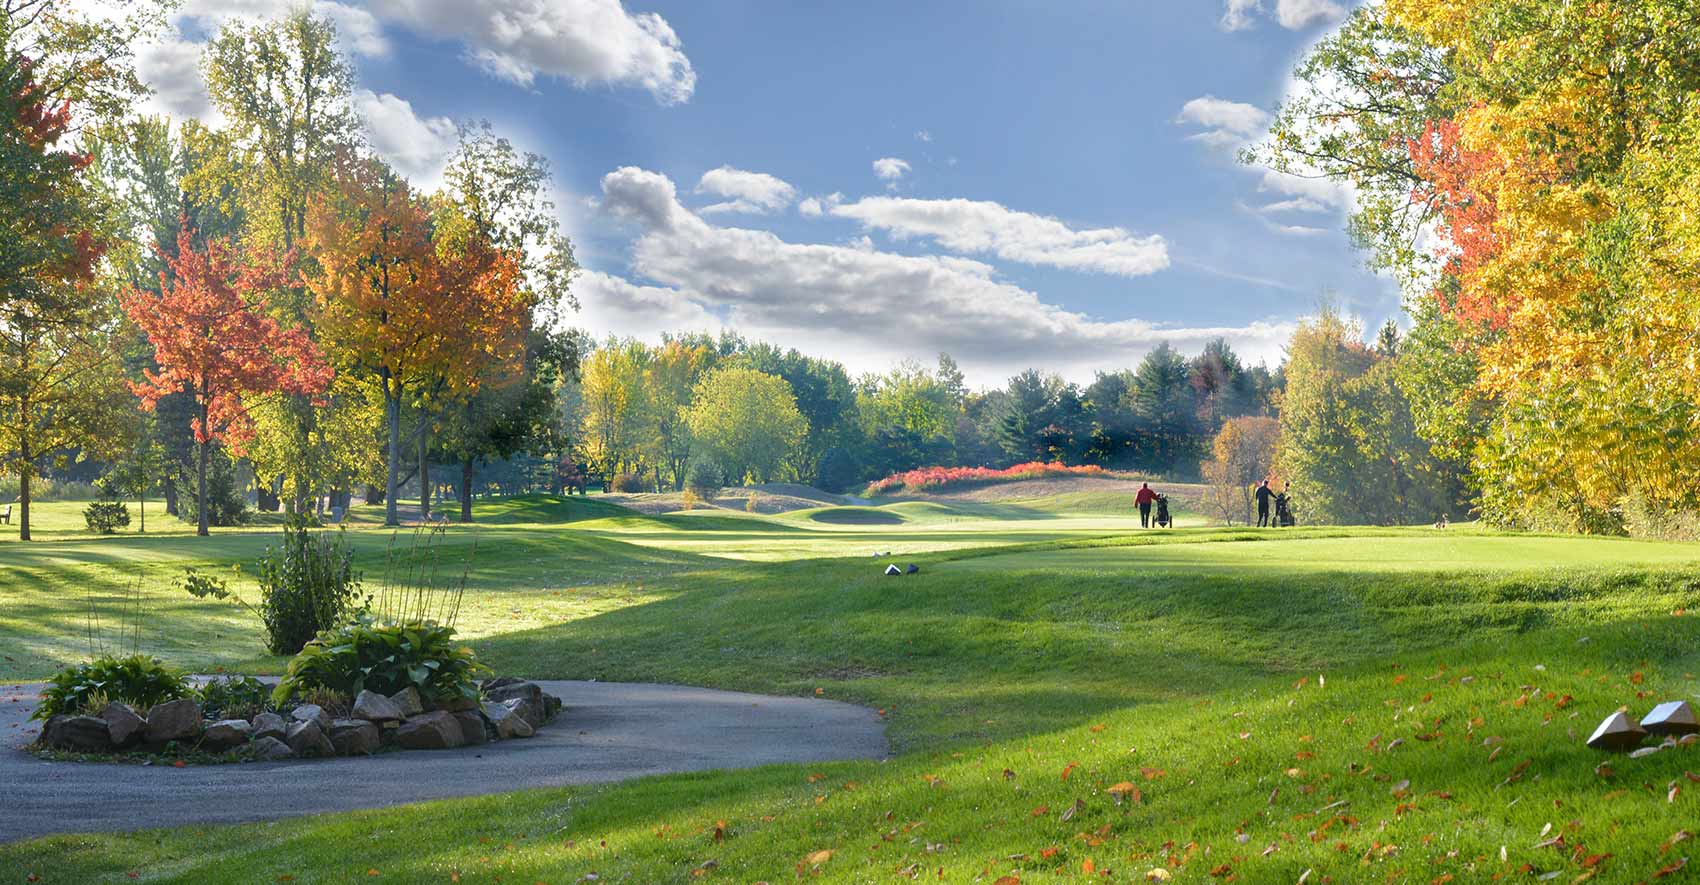 Why does fall golf offer an exceptional experience?